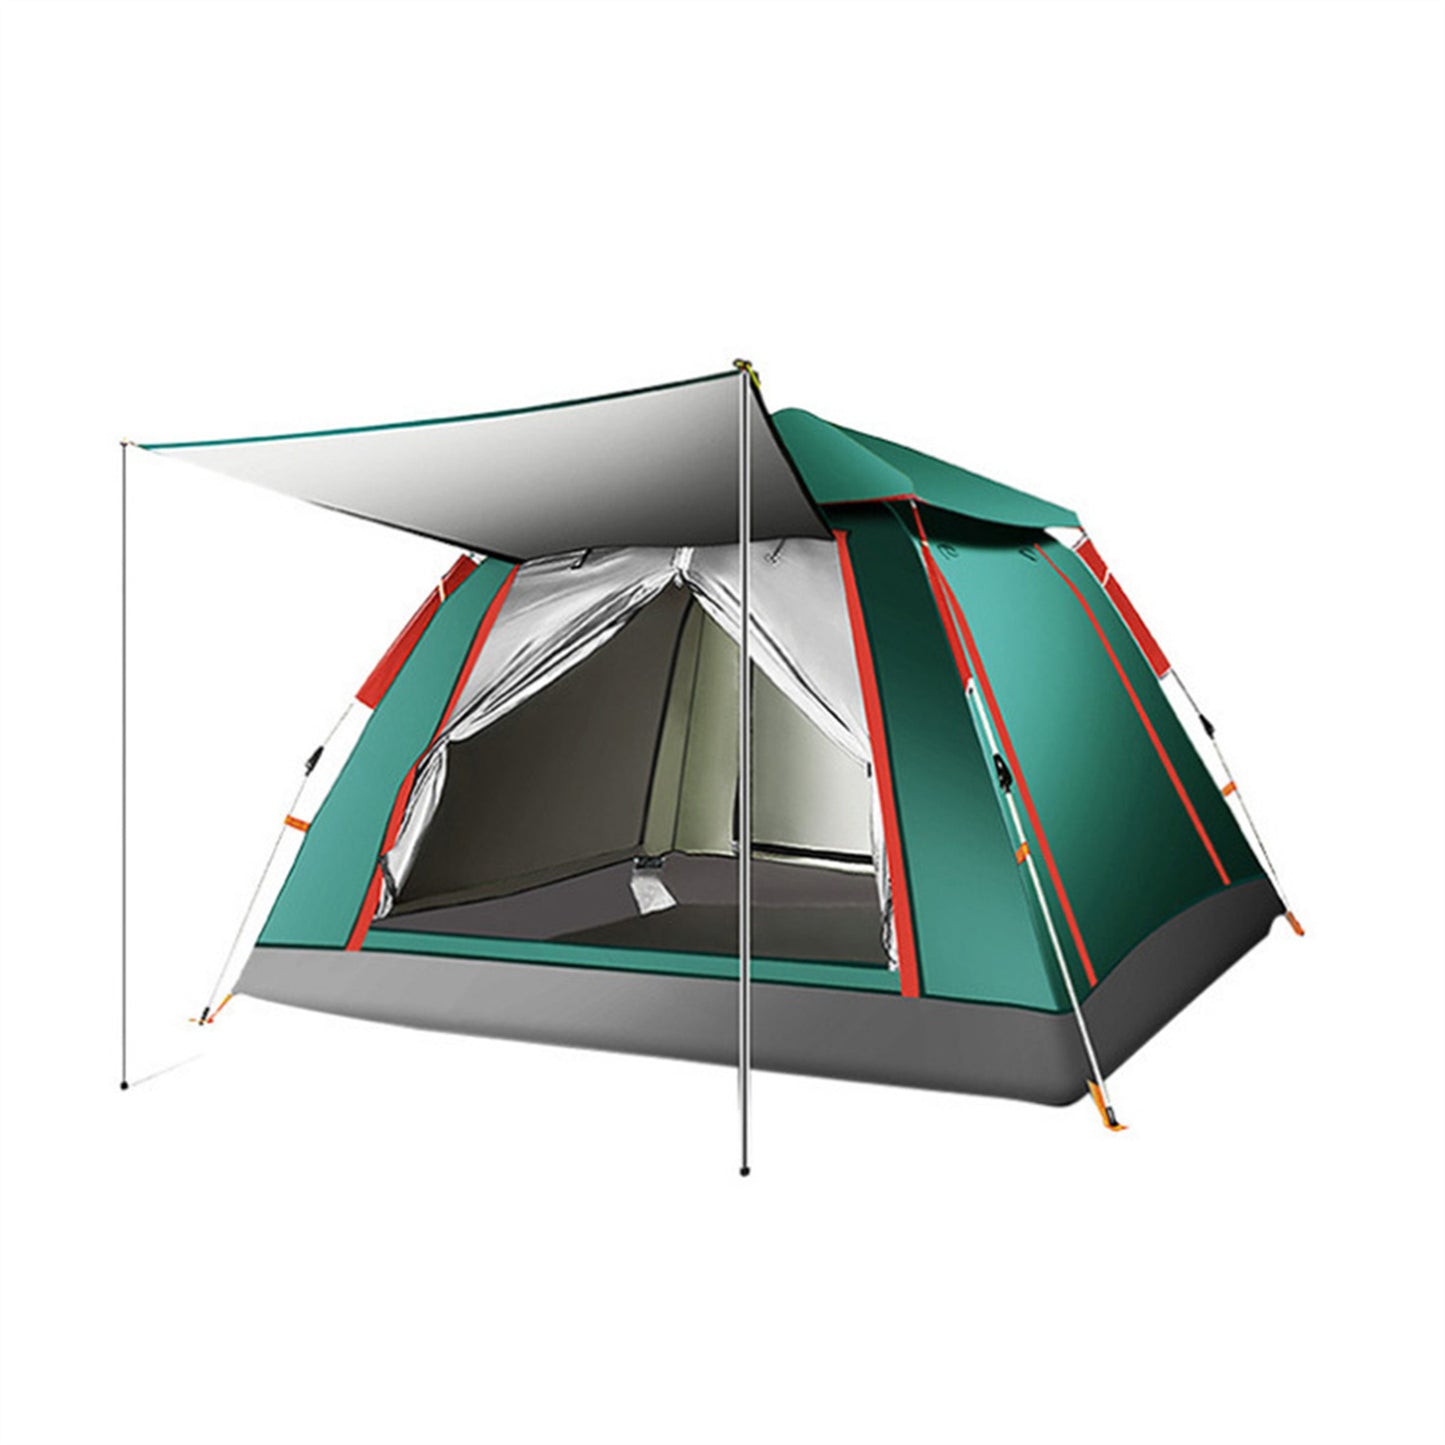 Single layer 2-3 person automatic tent